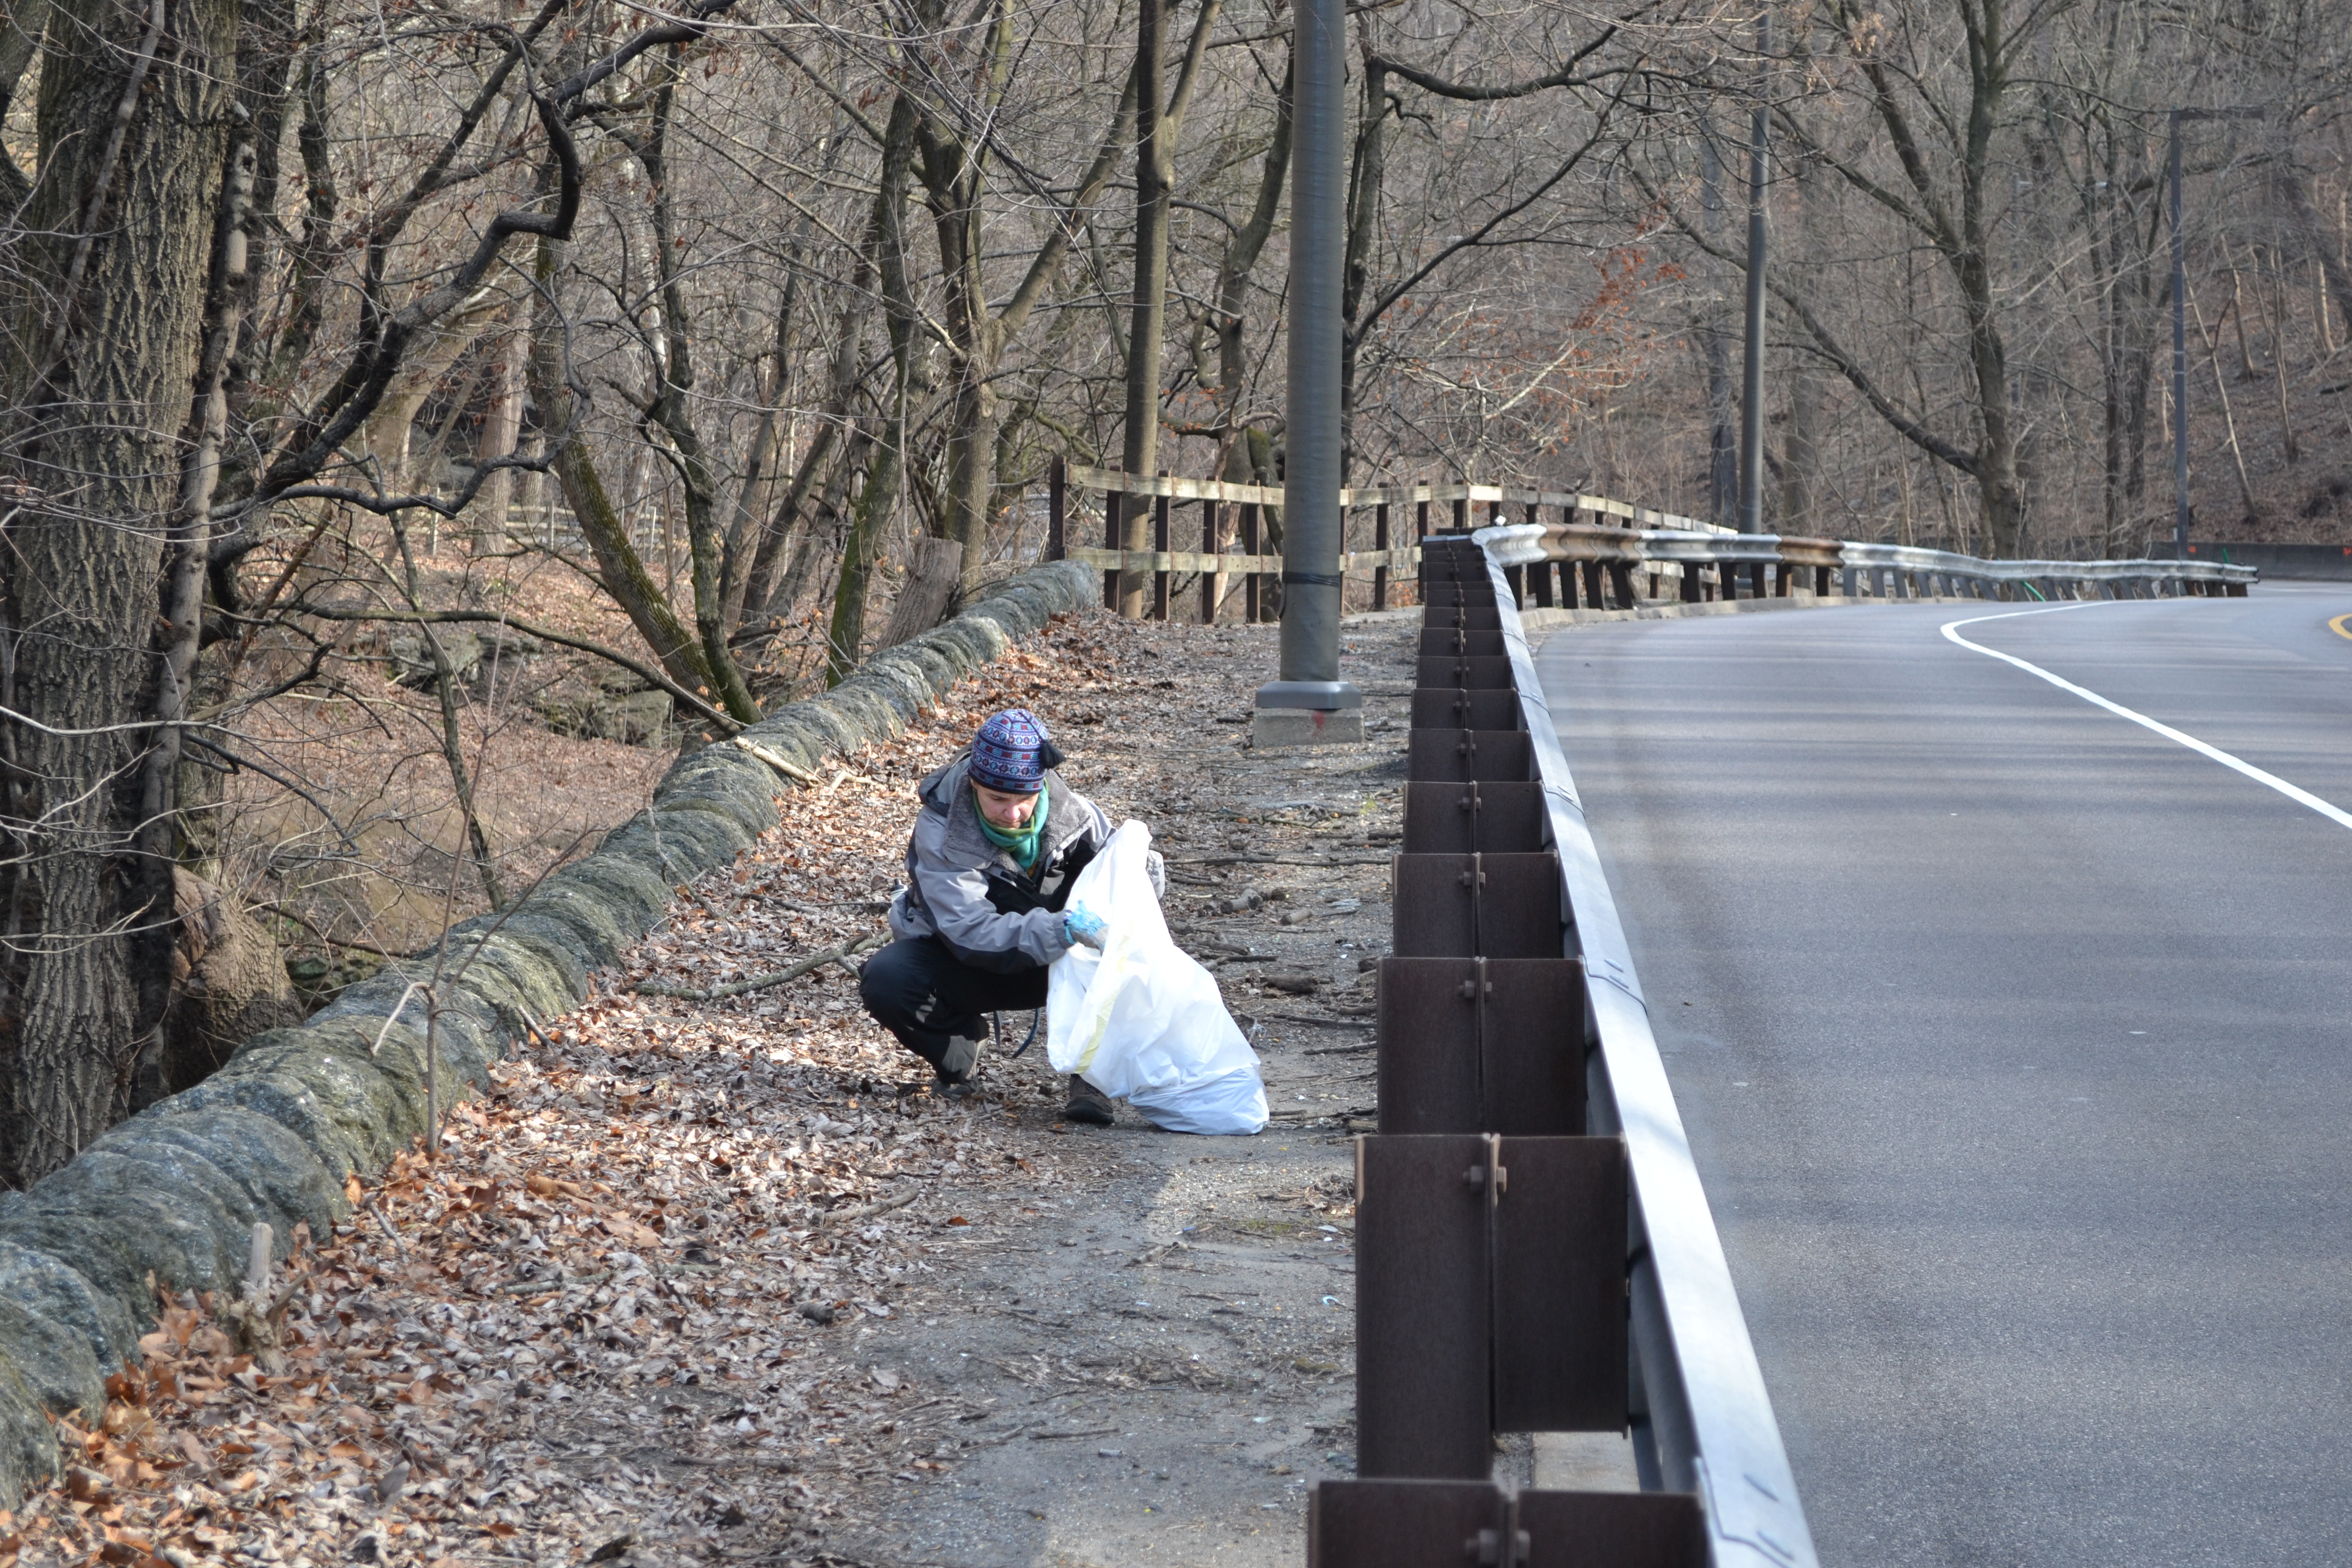 Friends of Wissahickon cleanup